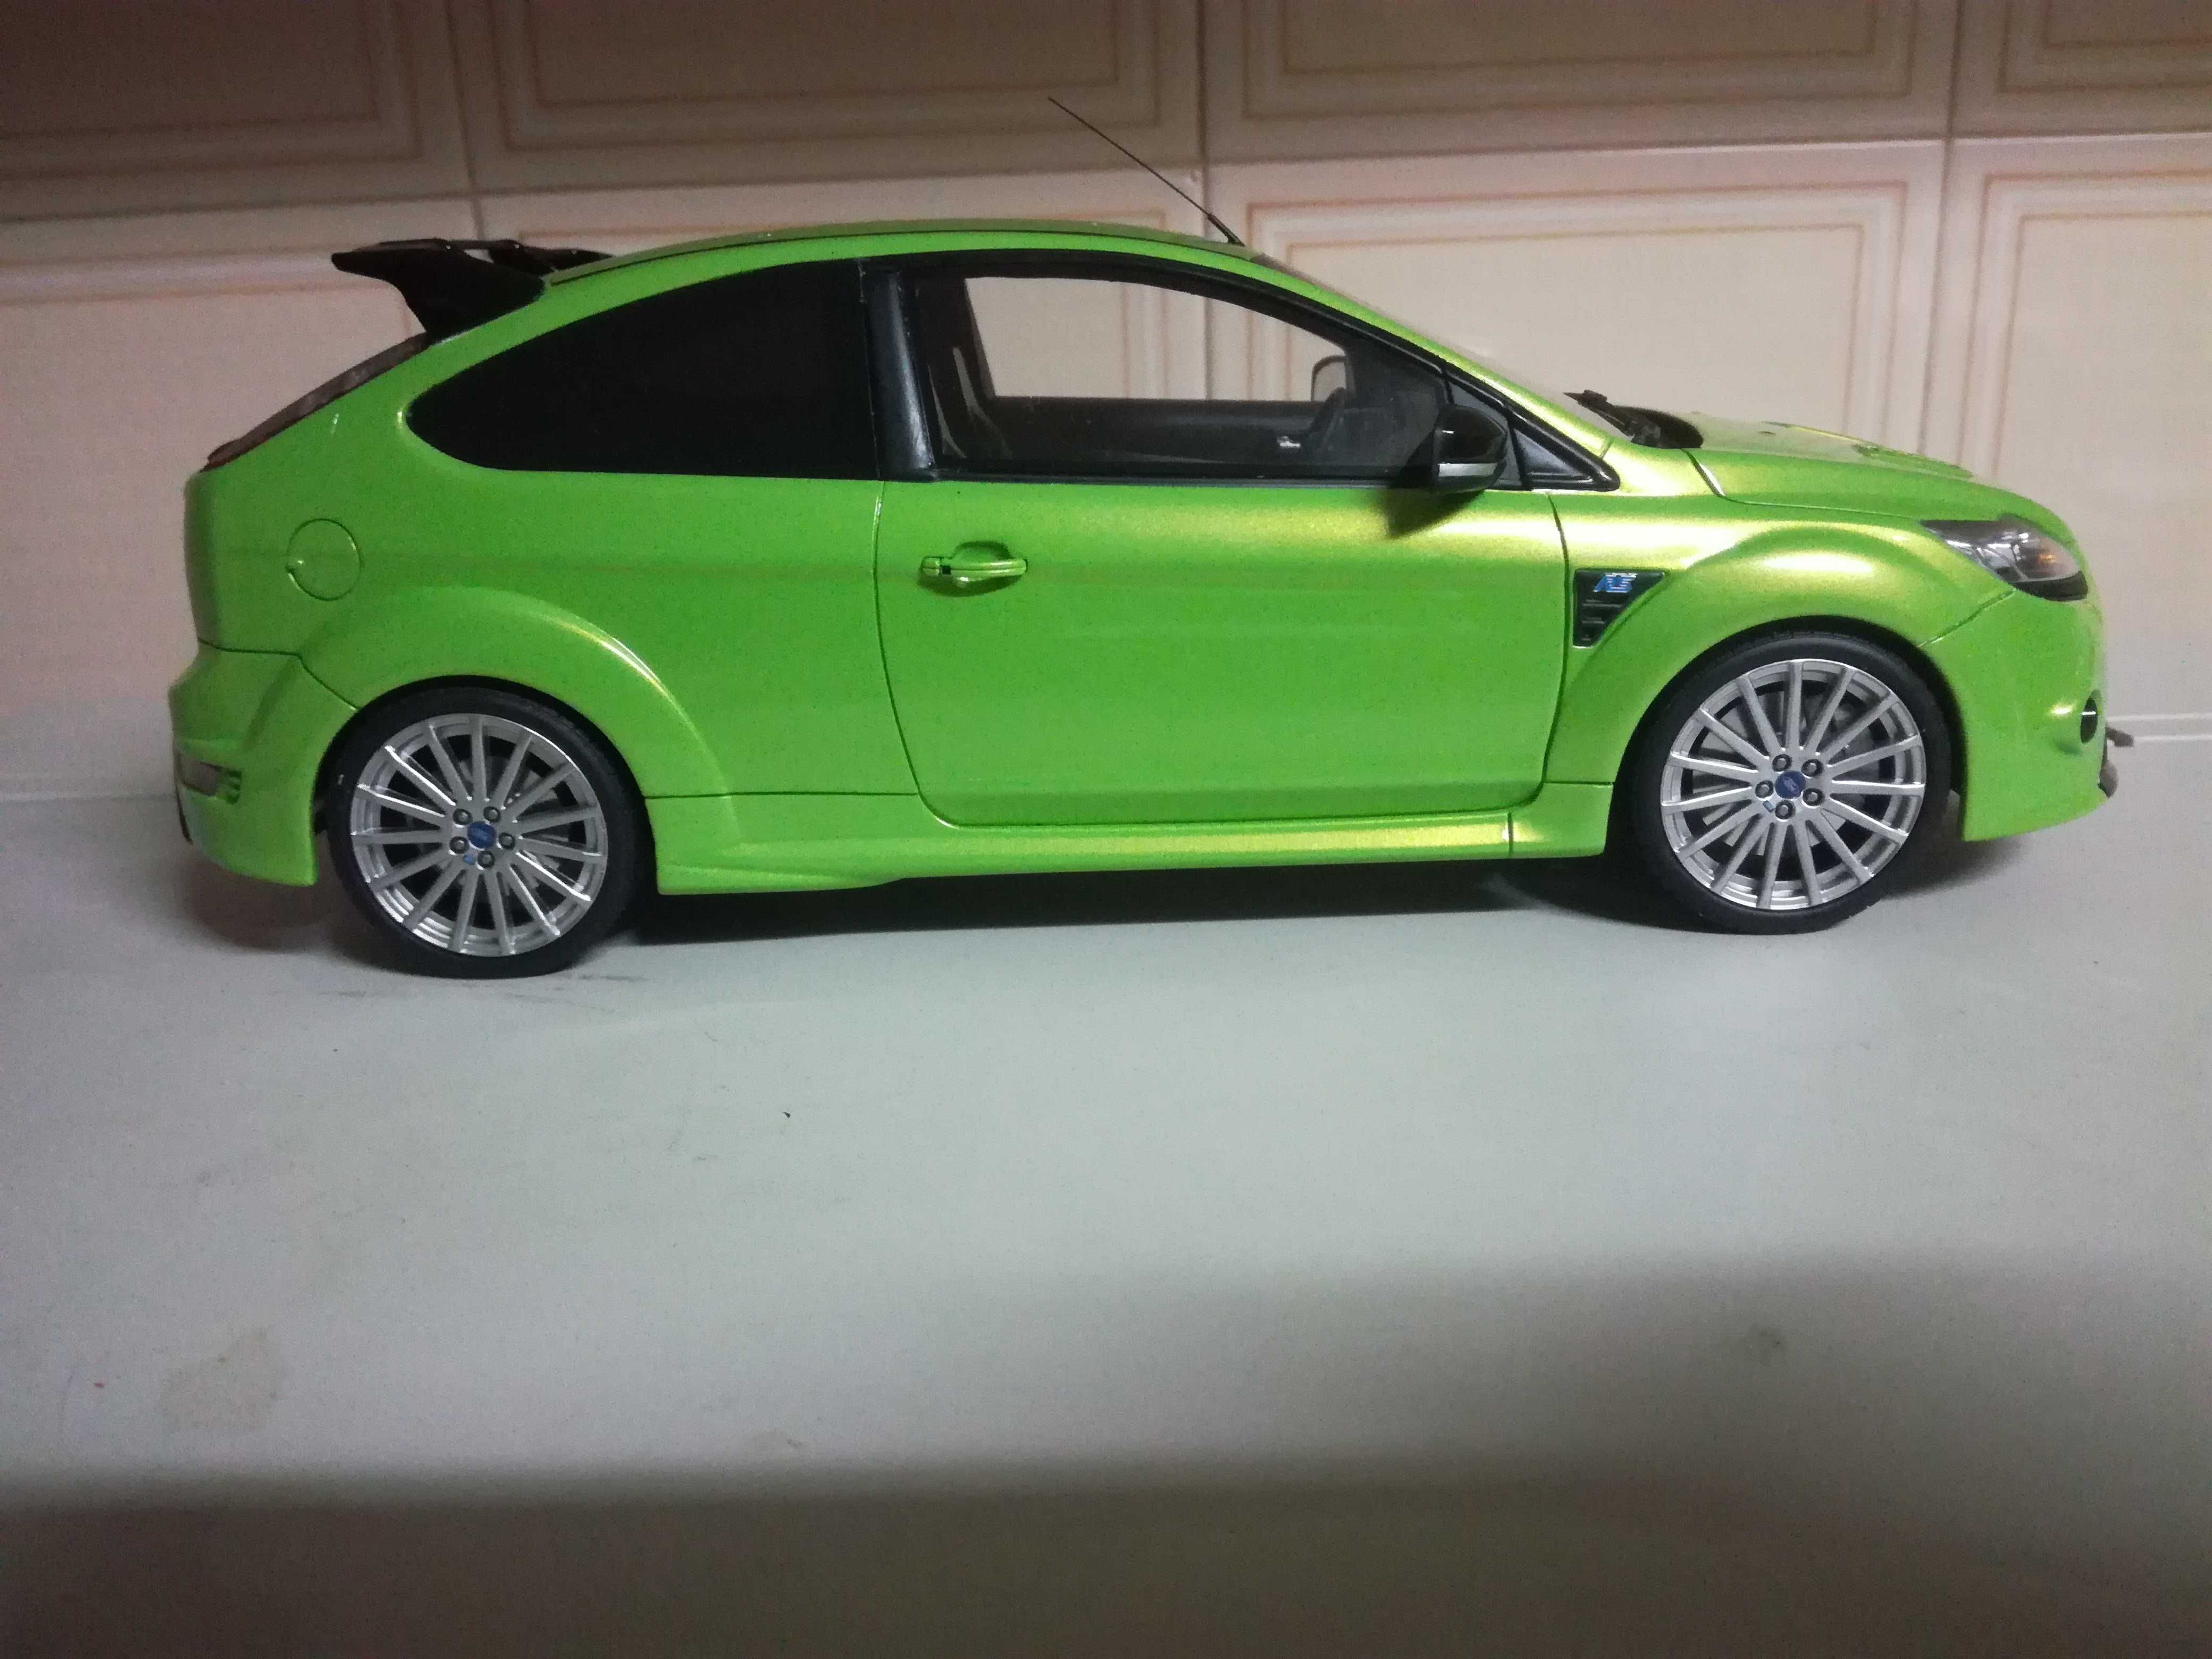 Ford Focus RS otto 1:18